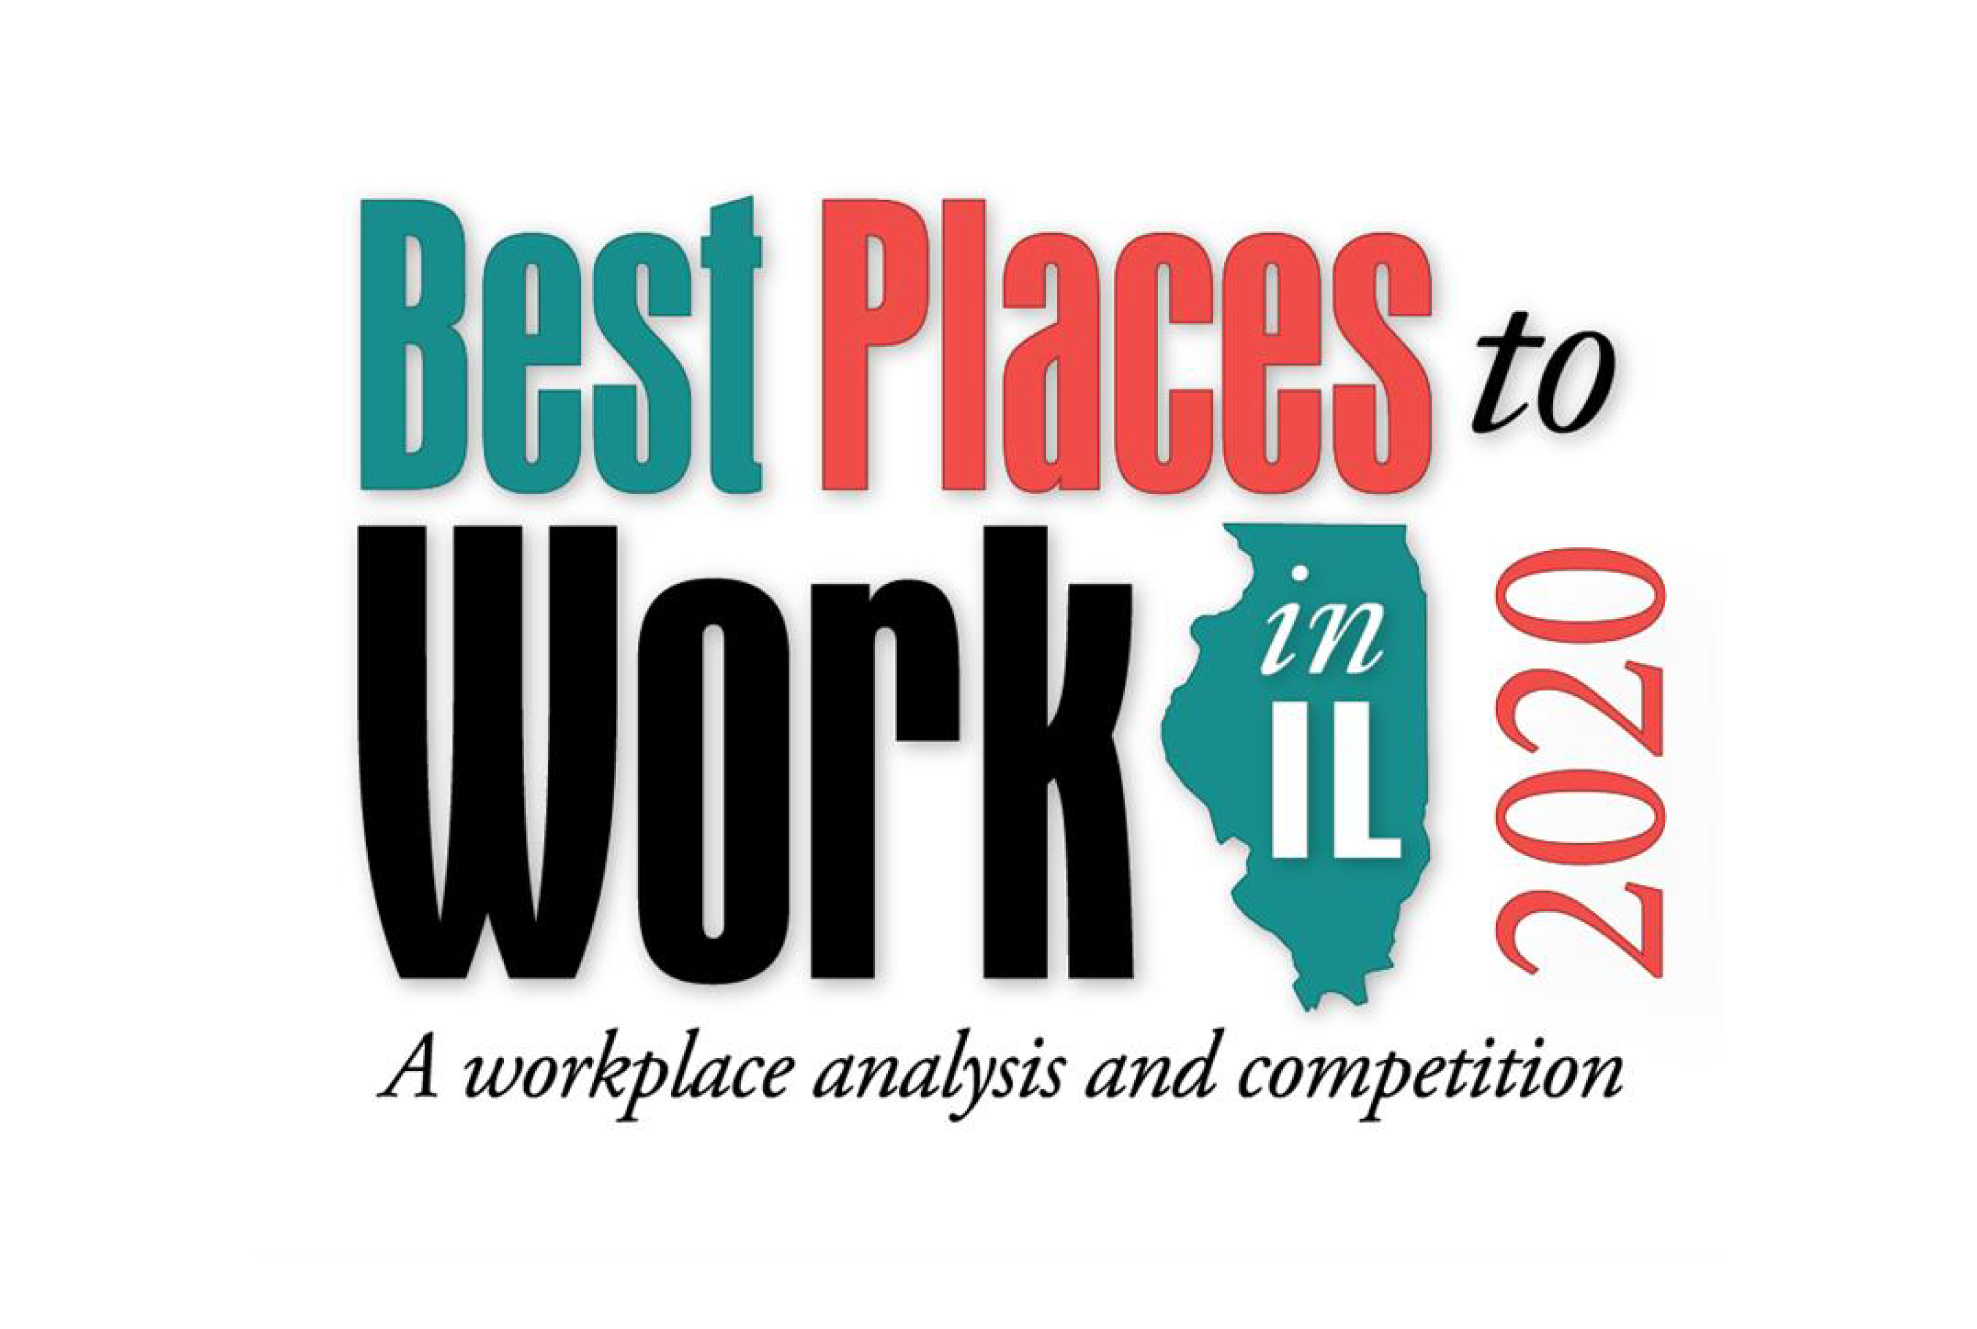 2020 Best Places to Work in Illinois